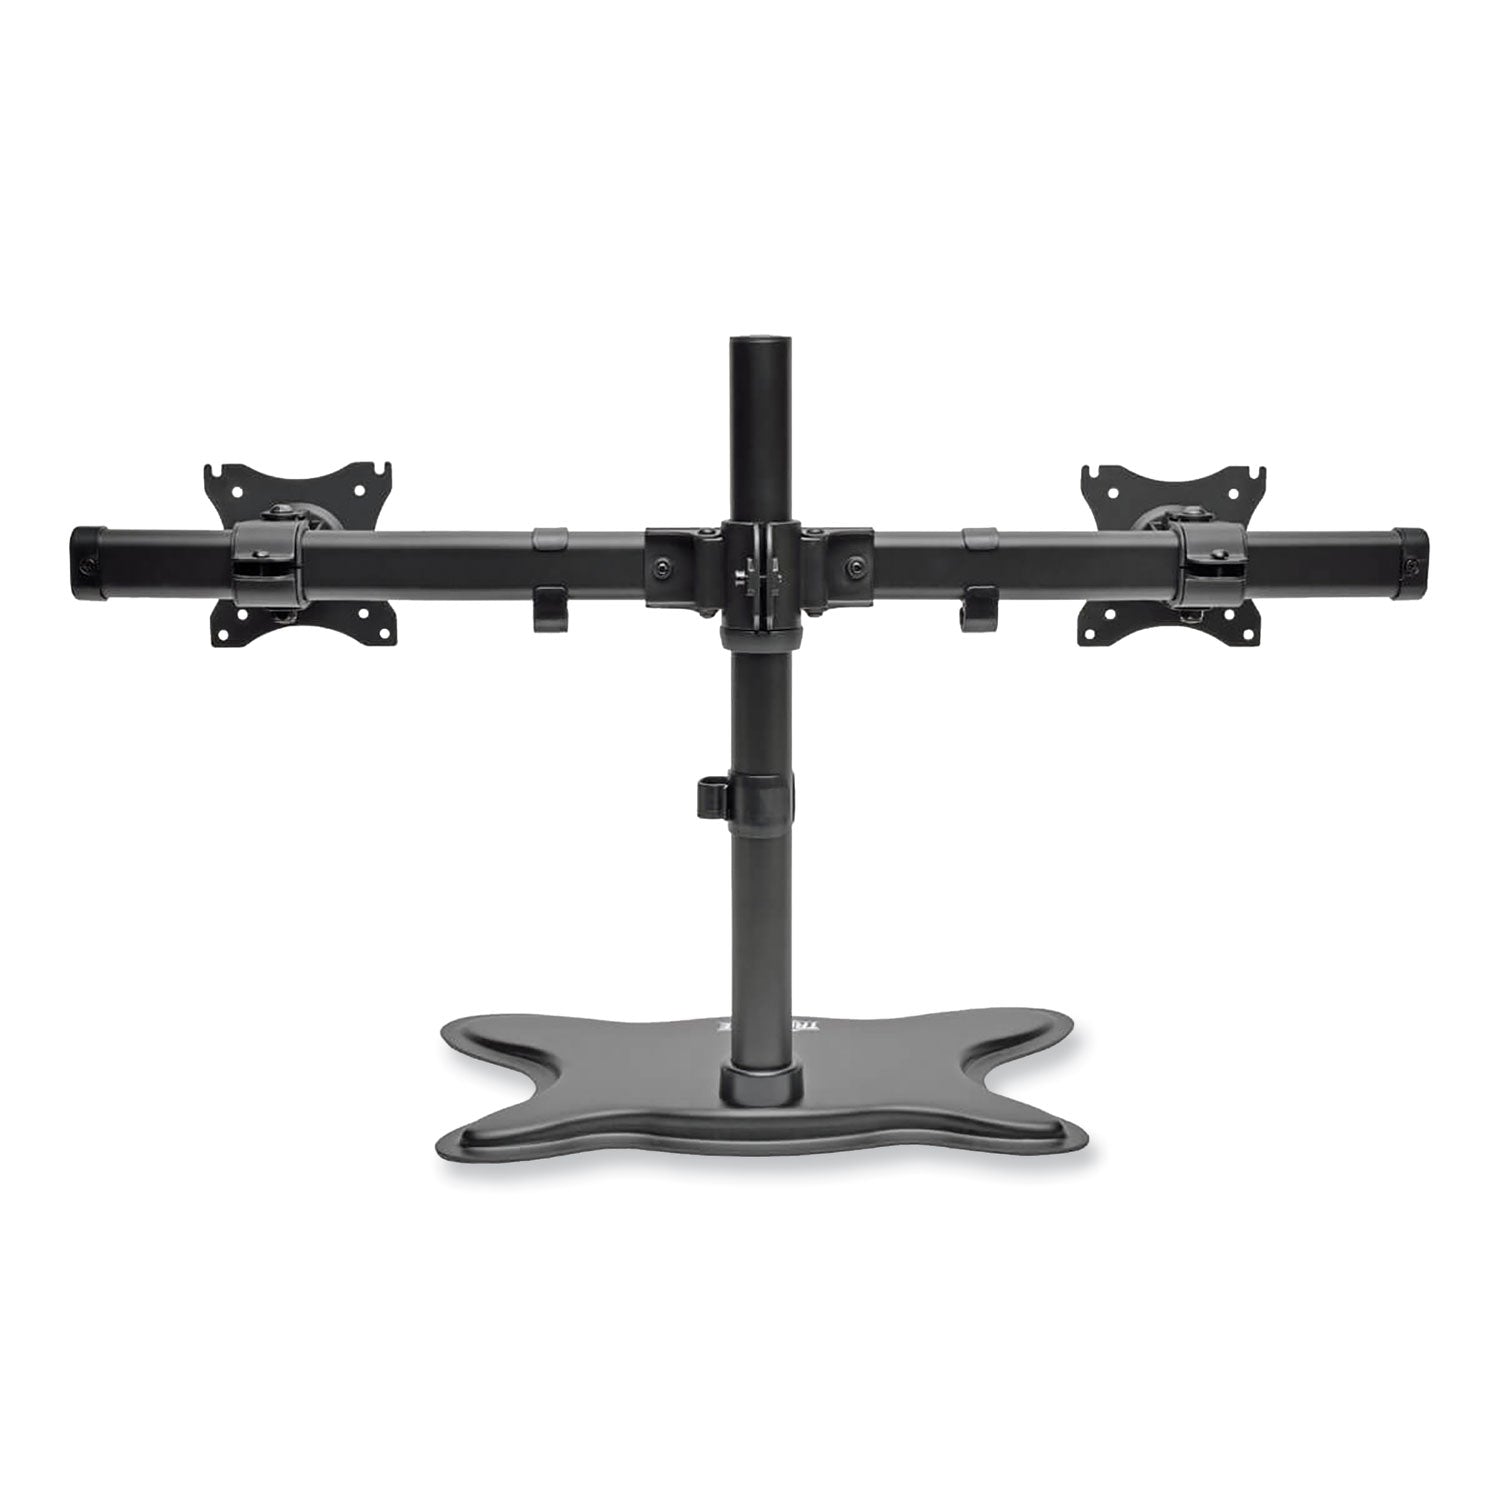 dual-desktop-monitor-stand-for-13-to-27-monitors-3169-x-10-x-1811-black-supports-26-lb_trpddr1327sdd - 1